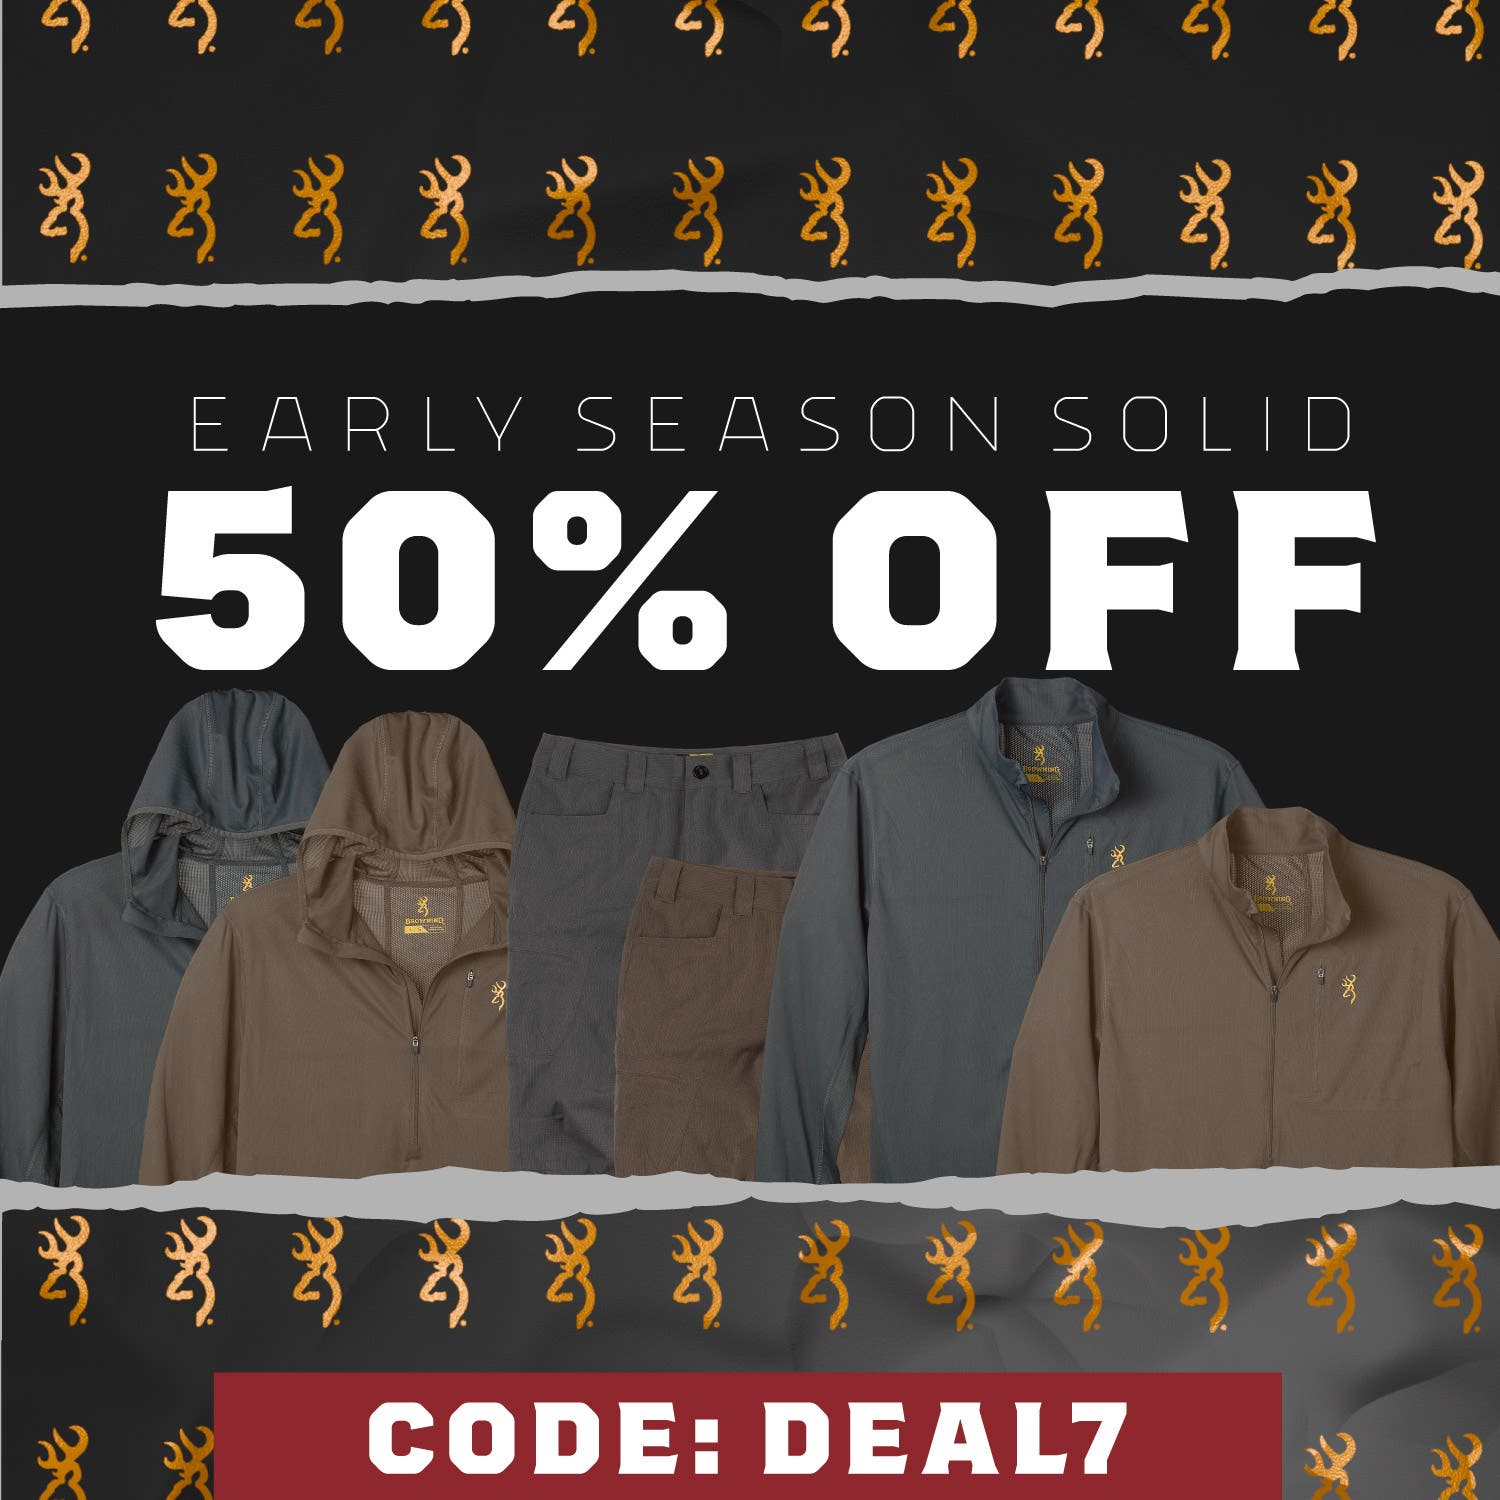 50% off early season solids